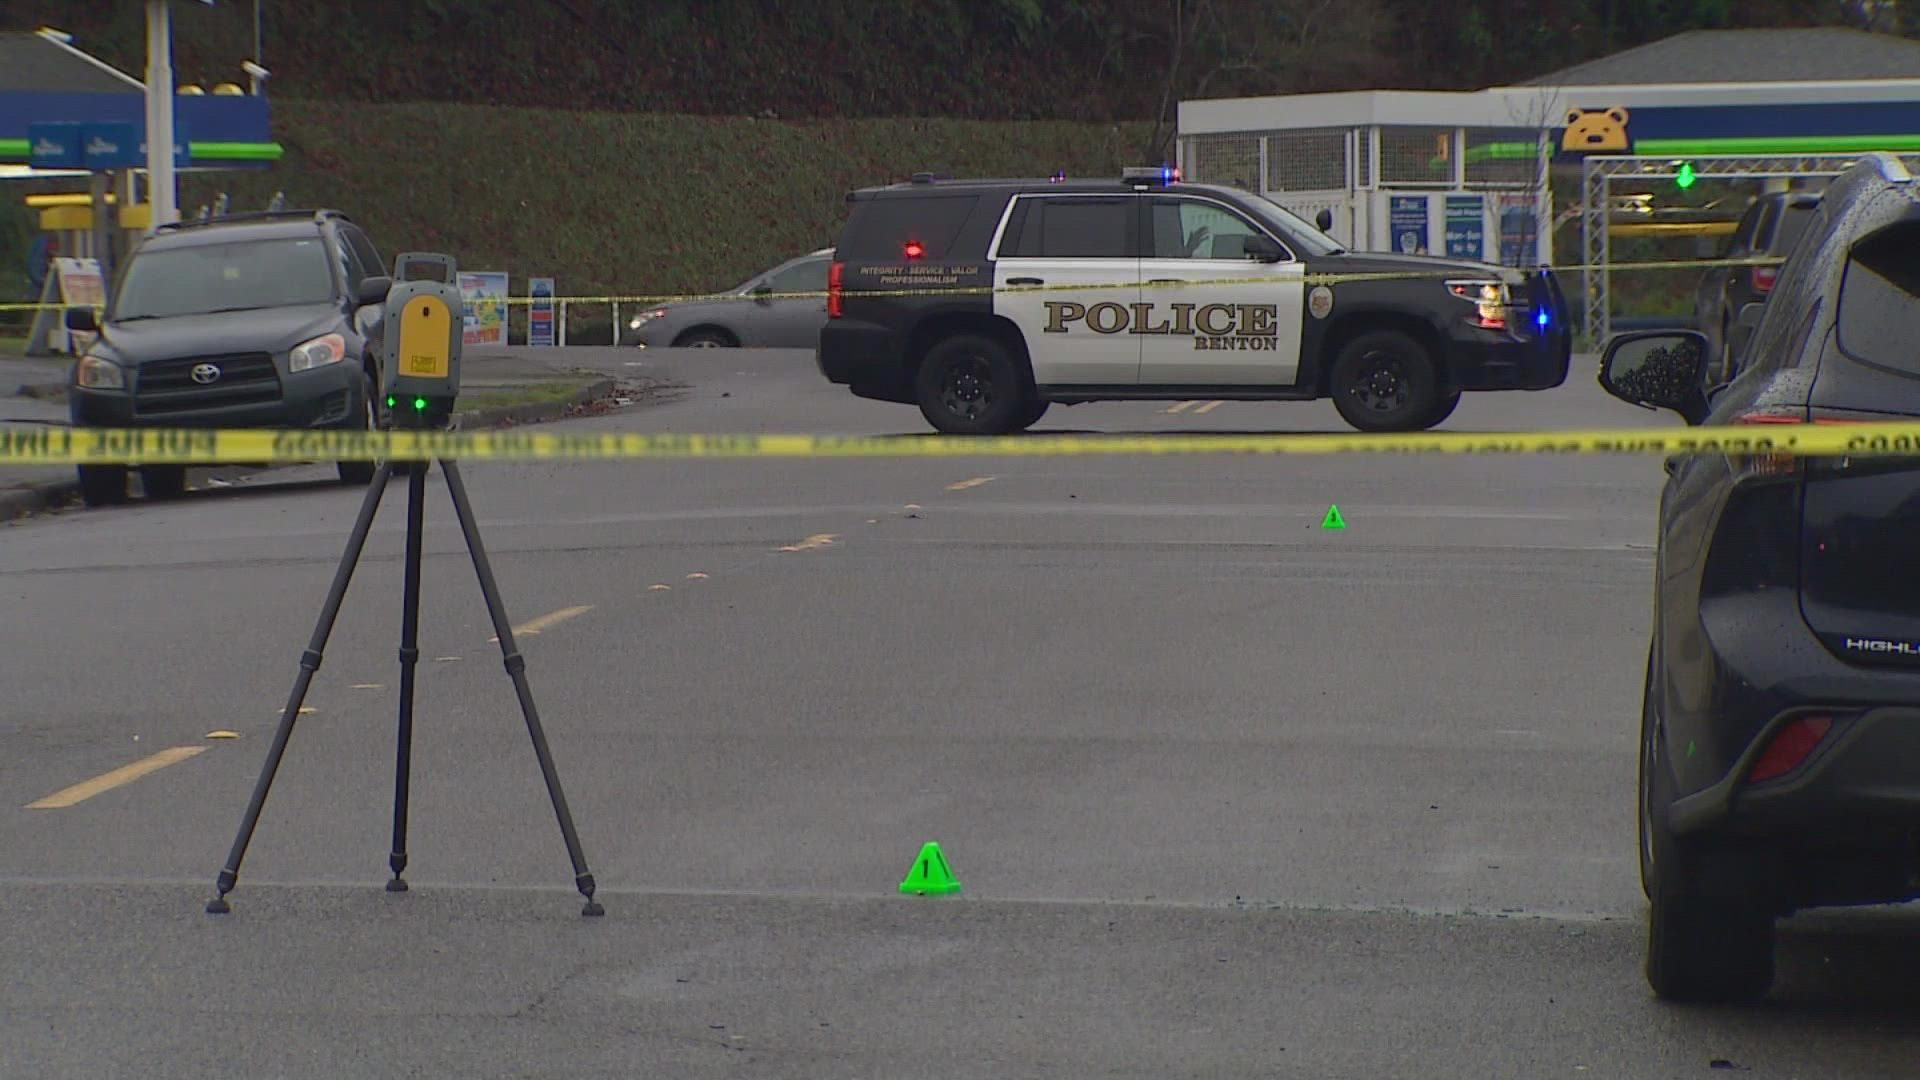 The same suspect is believed to be connected to all three shootings, according to Renton police.